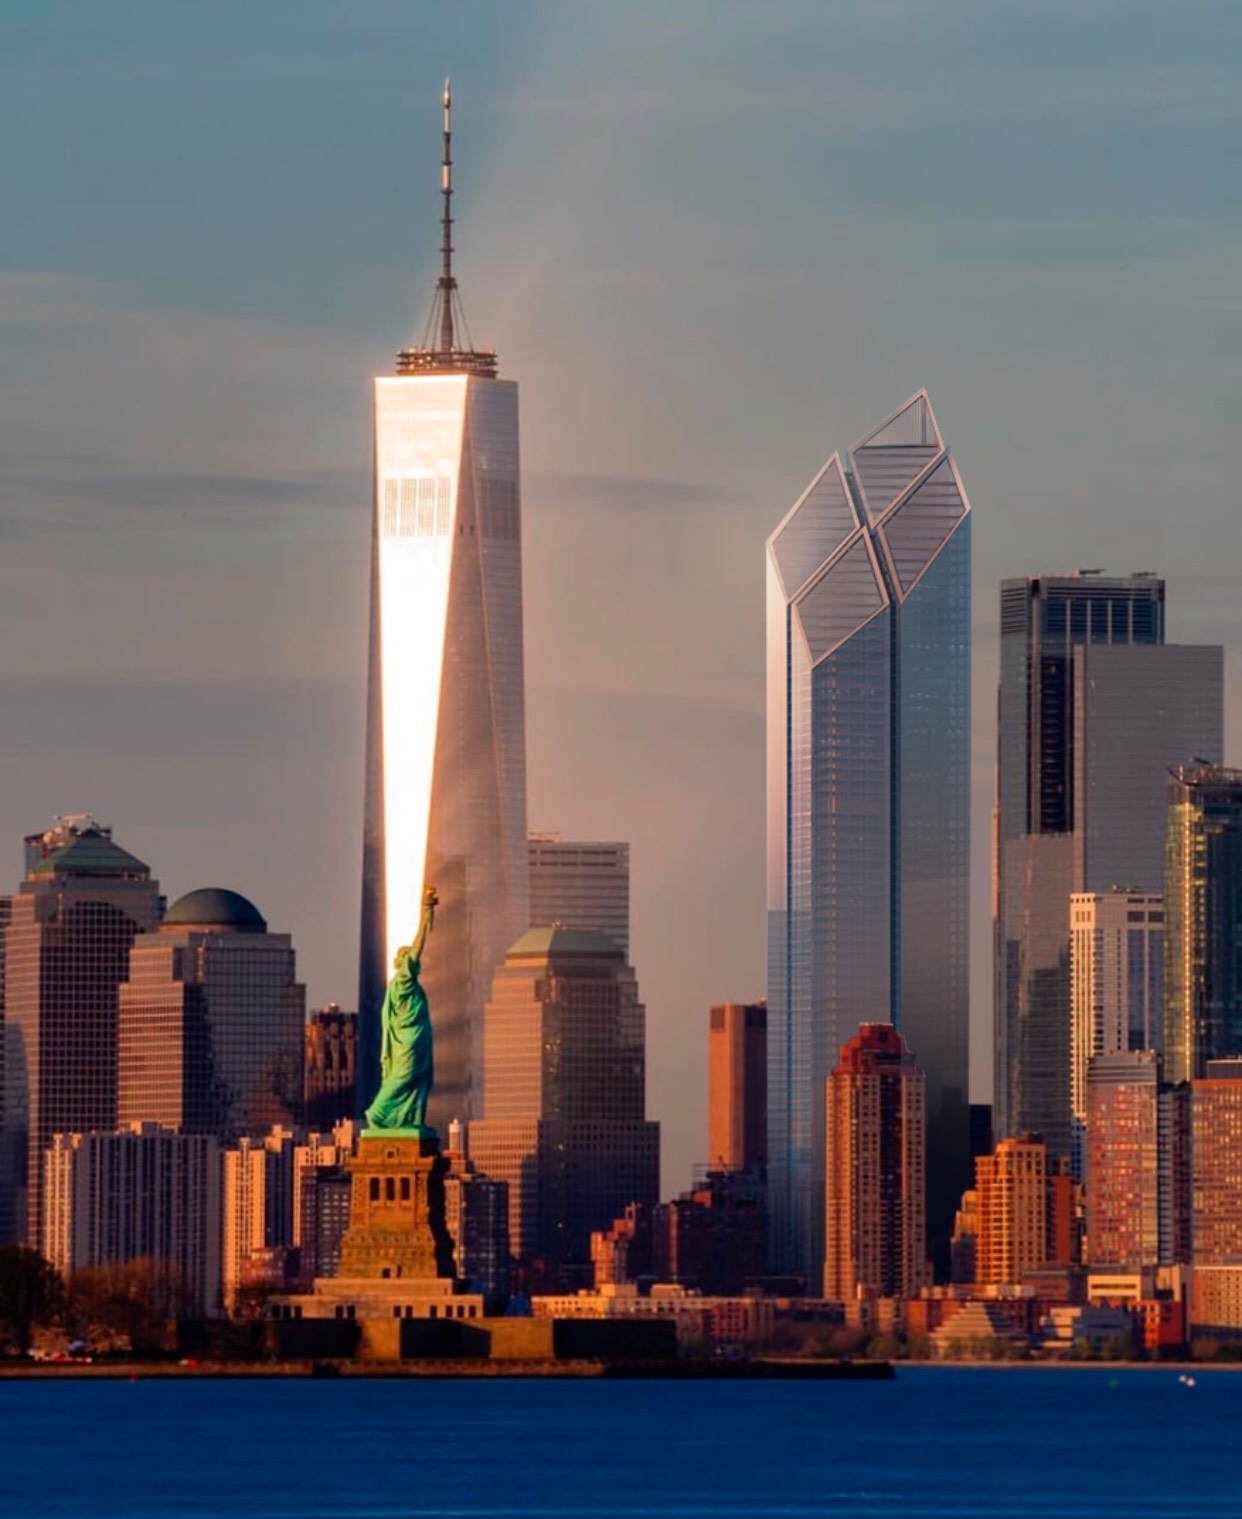 Illustrative Renderings Released of Norman Foster's Original Design for Two World Trade Center